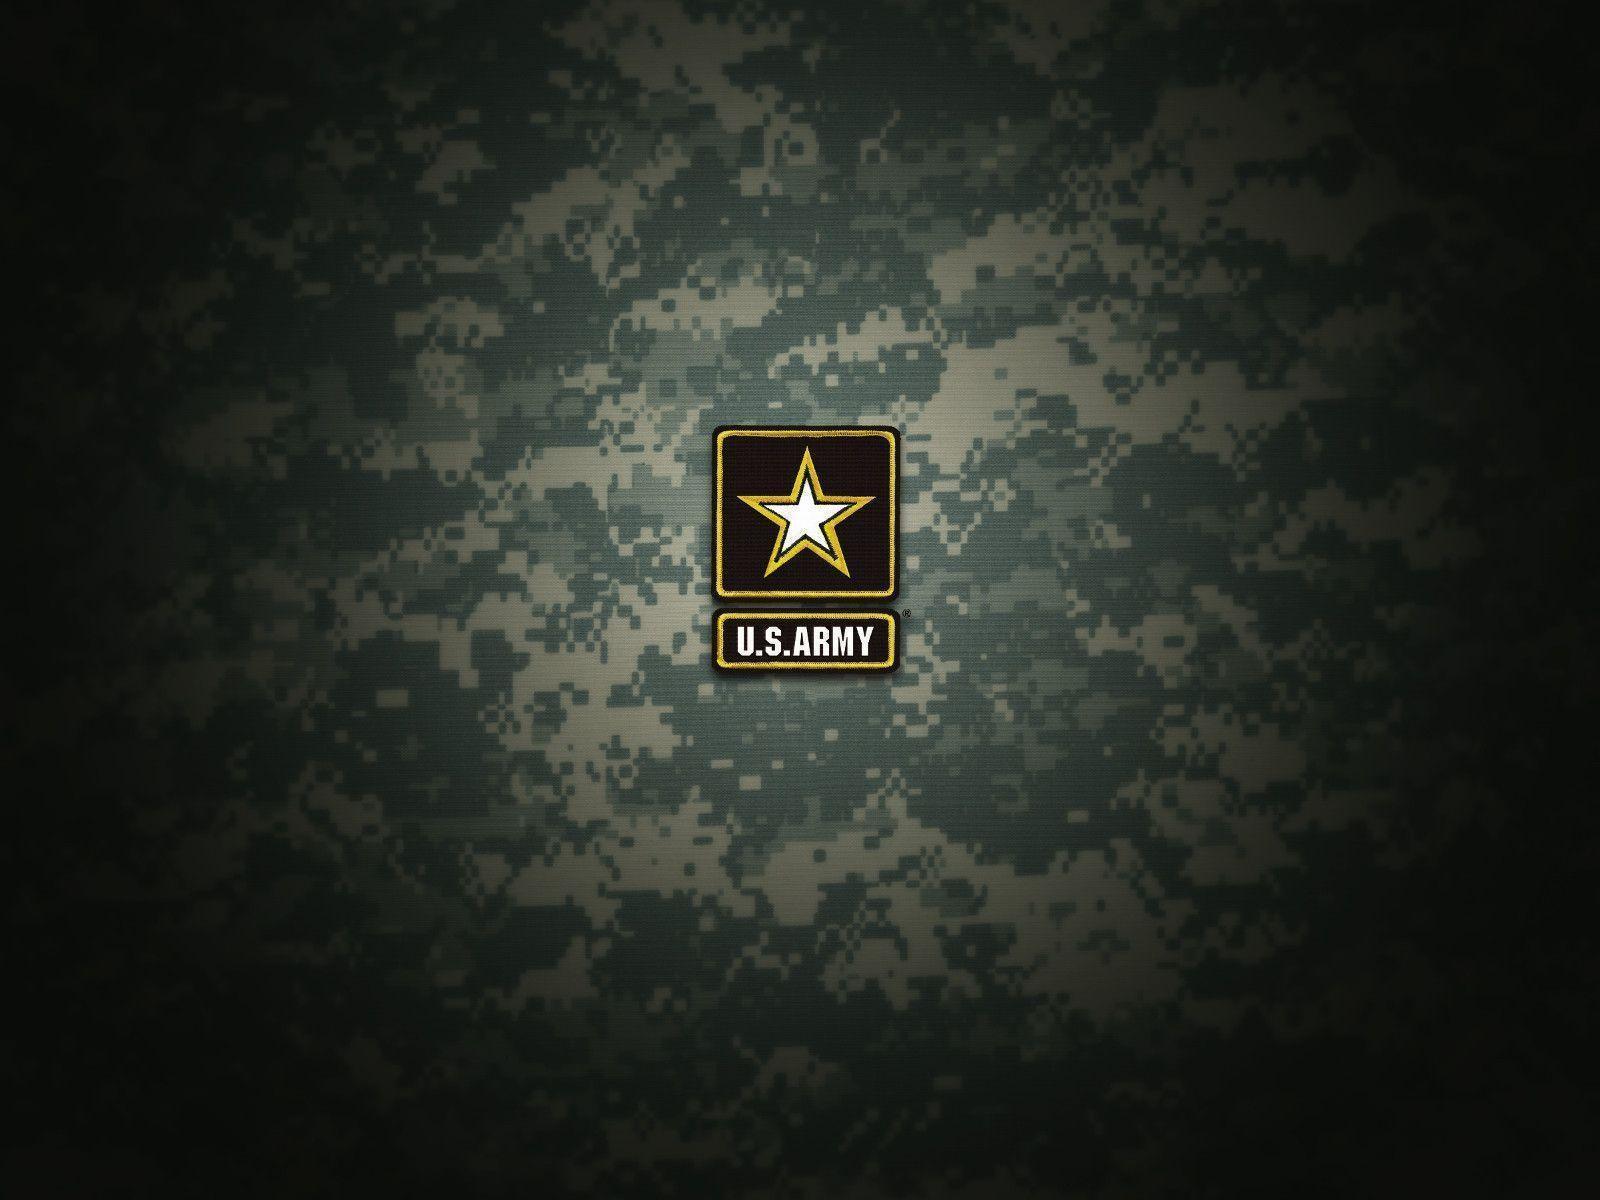 Us Army Wallpaper Backgrounds Wallpapers 1600x1200PX ~ Amazing Us